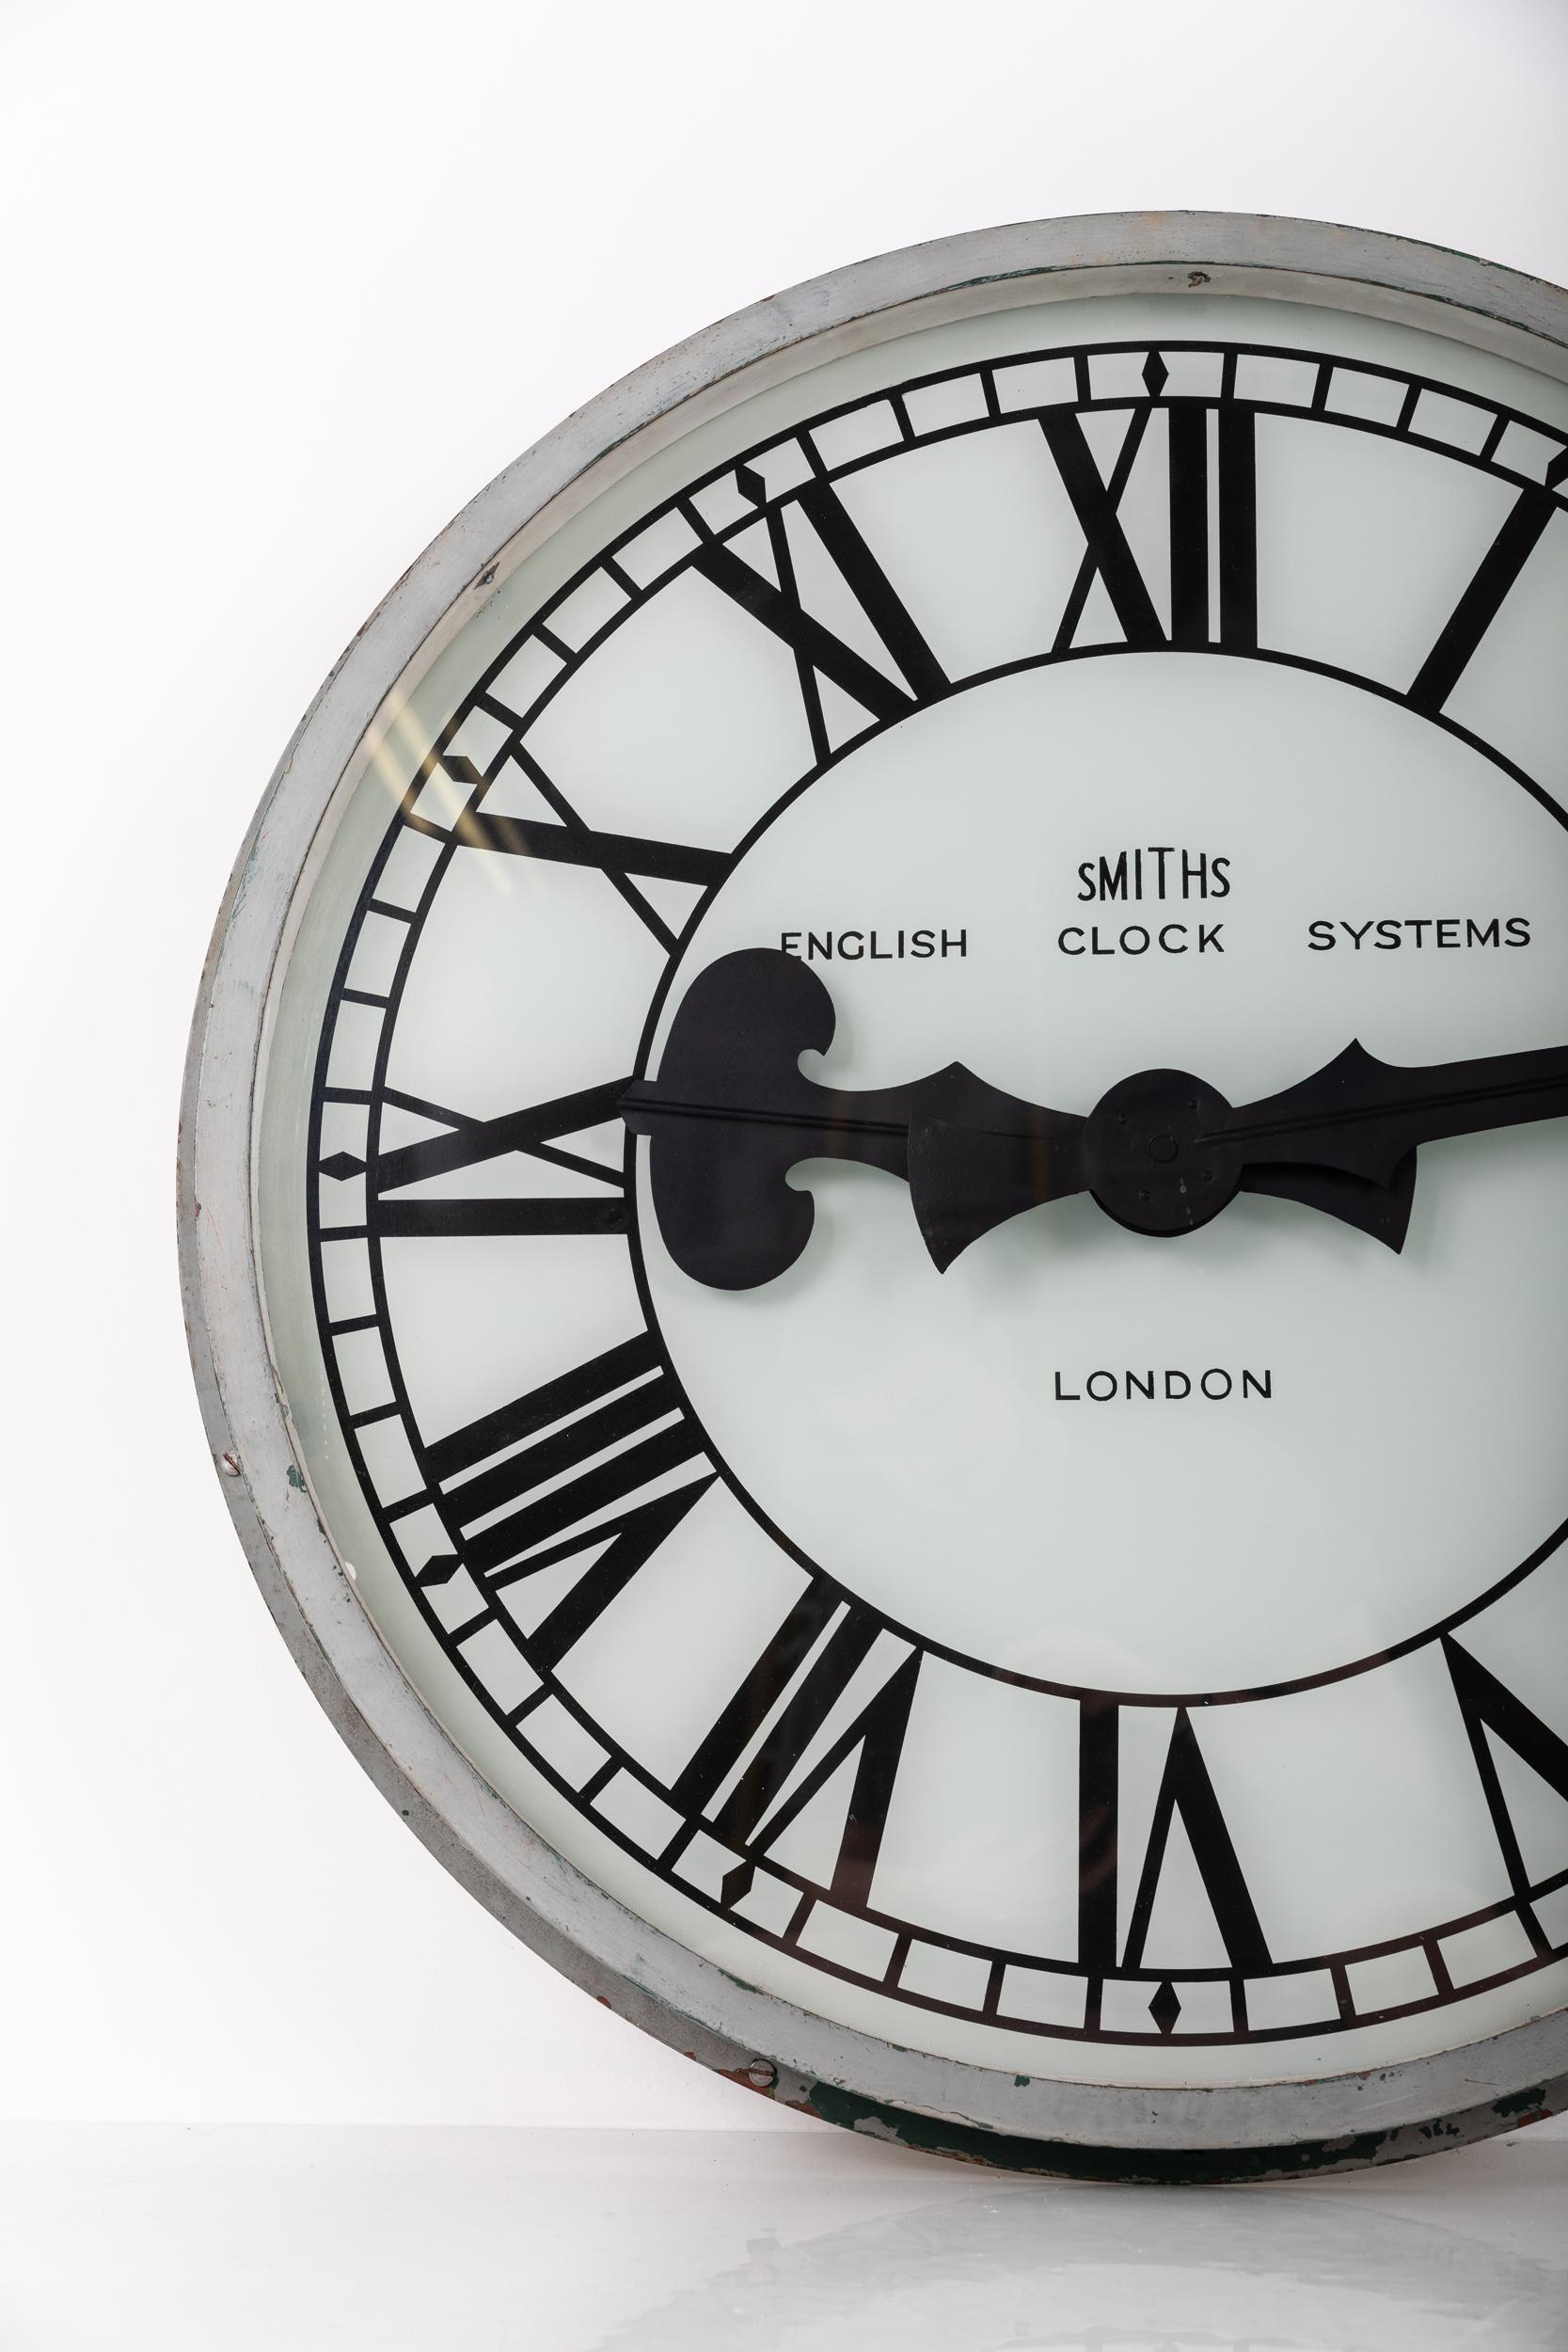 Exceptional example of a large illuminated wall clock manufactured by Smiths English Clock Systems. c.1930

Heavy gauge steel casing in old grey paint - presumably once flush mounted into an opening - now has a custom mount made. The dial is made of